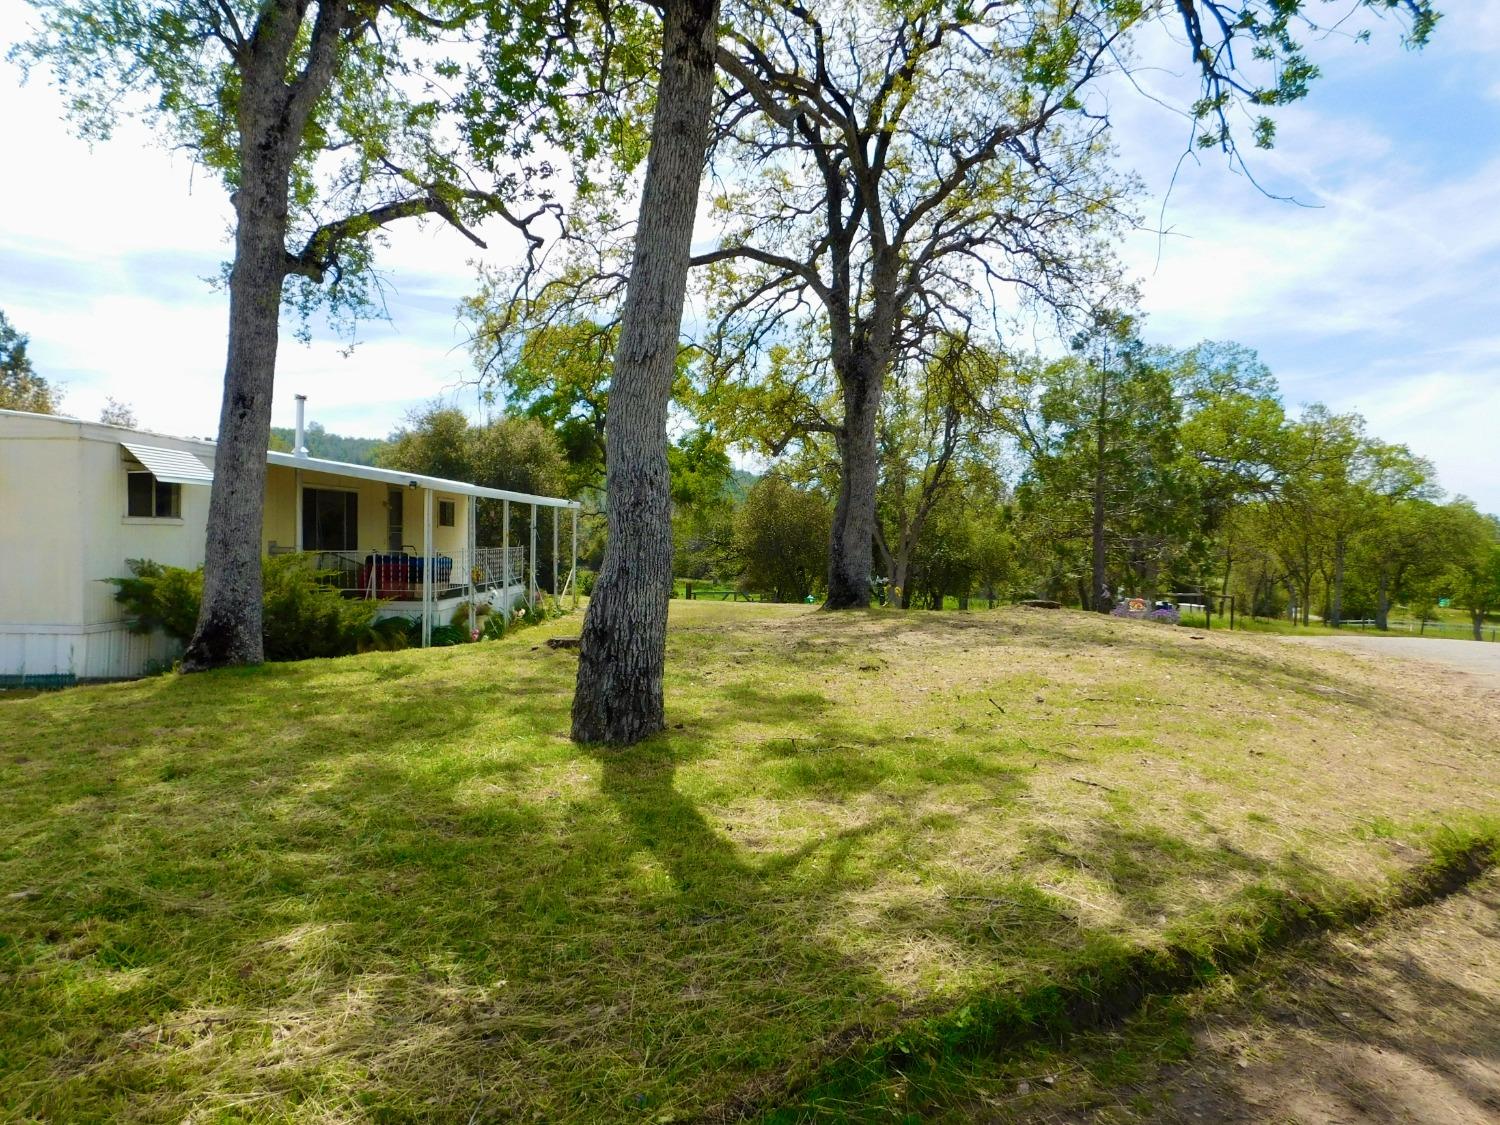 Photo of 44630 Foxtail Rd in Coarsegold, CA